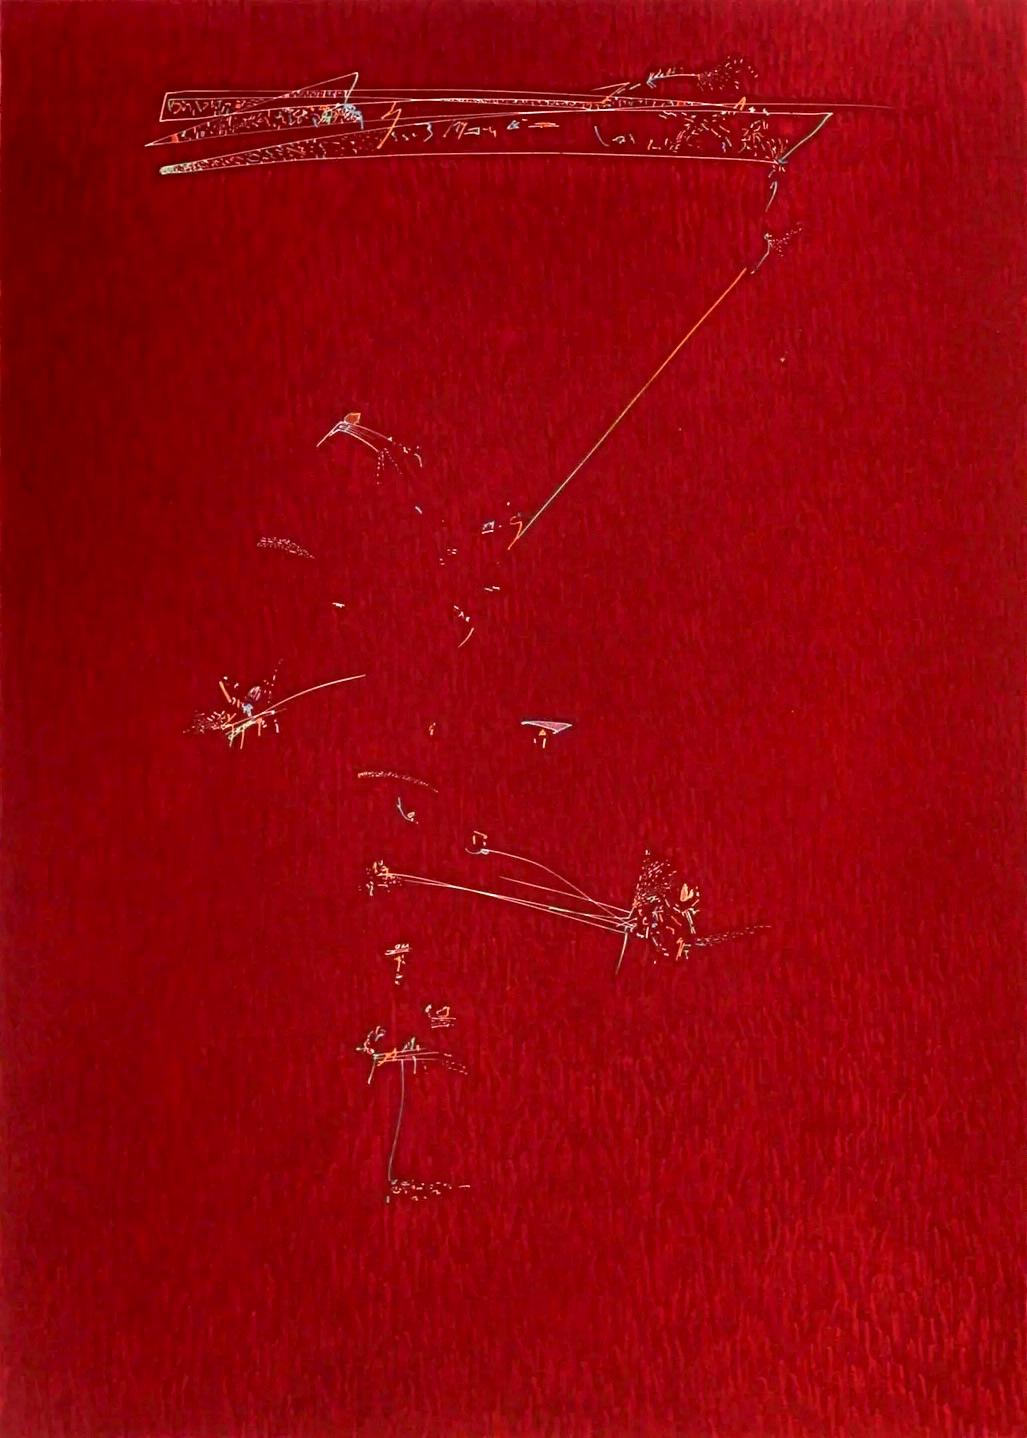 John Dowell Abstract Print - Philadelphia Song: abstract minimal red hand-colored etching  with music, dance